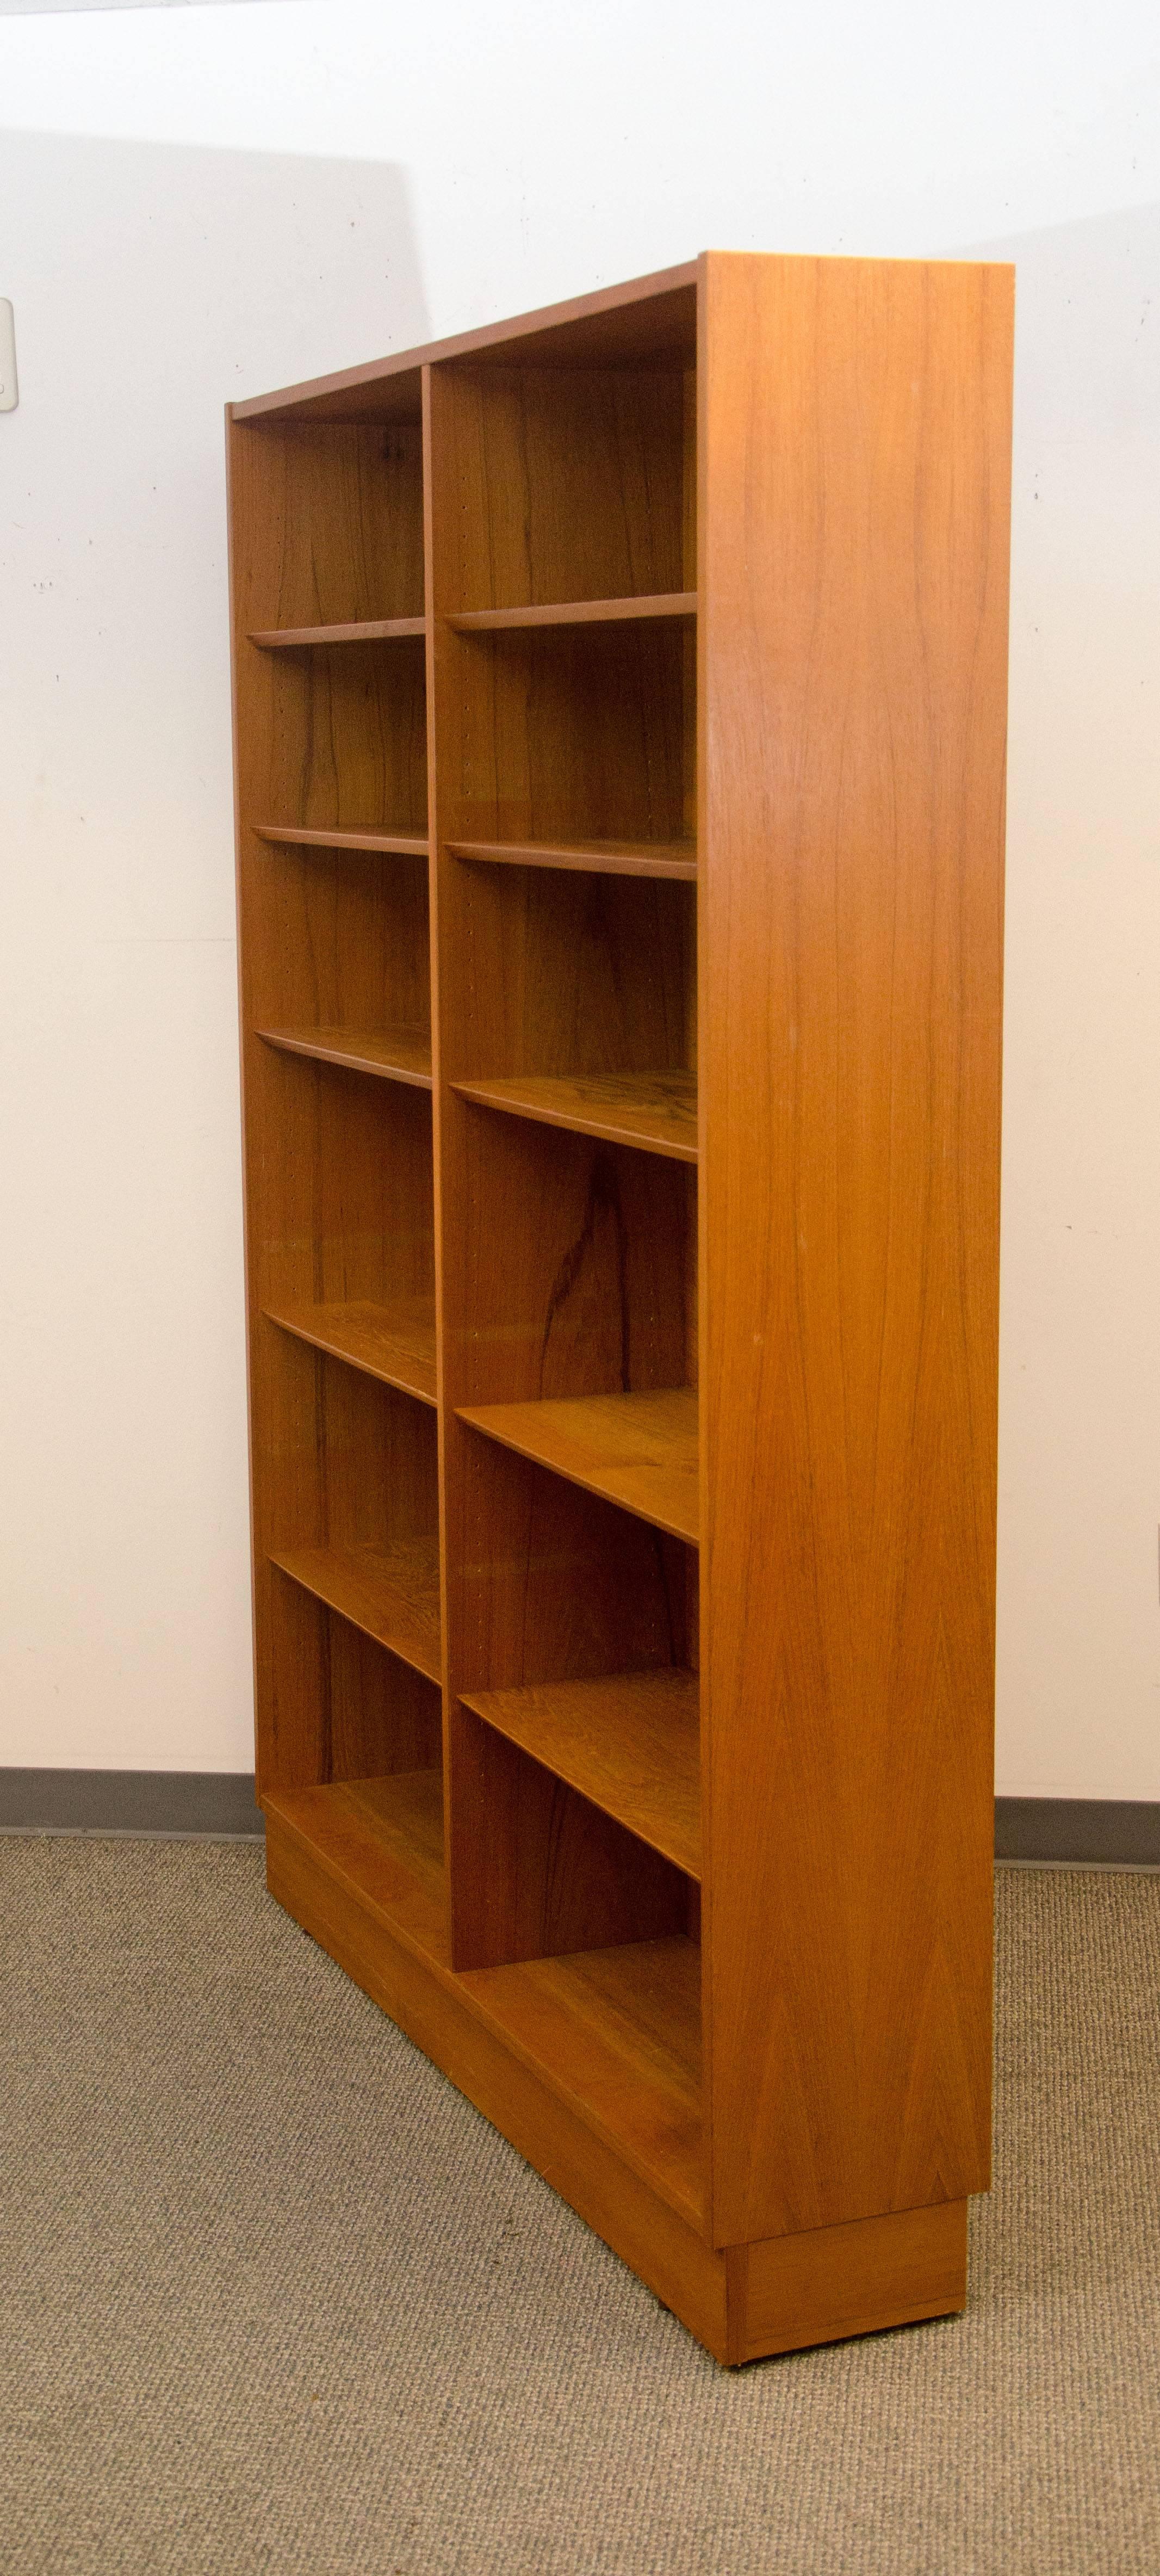 Spacious Danish teak bookcase with ten shelves, two shelves are stationary and eight are adjustable. The shelves have a decorative bevel on the front edge. The shelves are mounted on an adjustable wire system that is not visible when shelves are